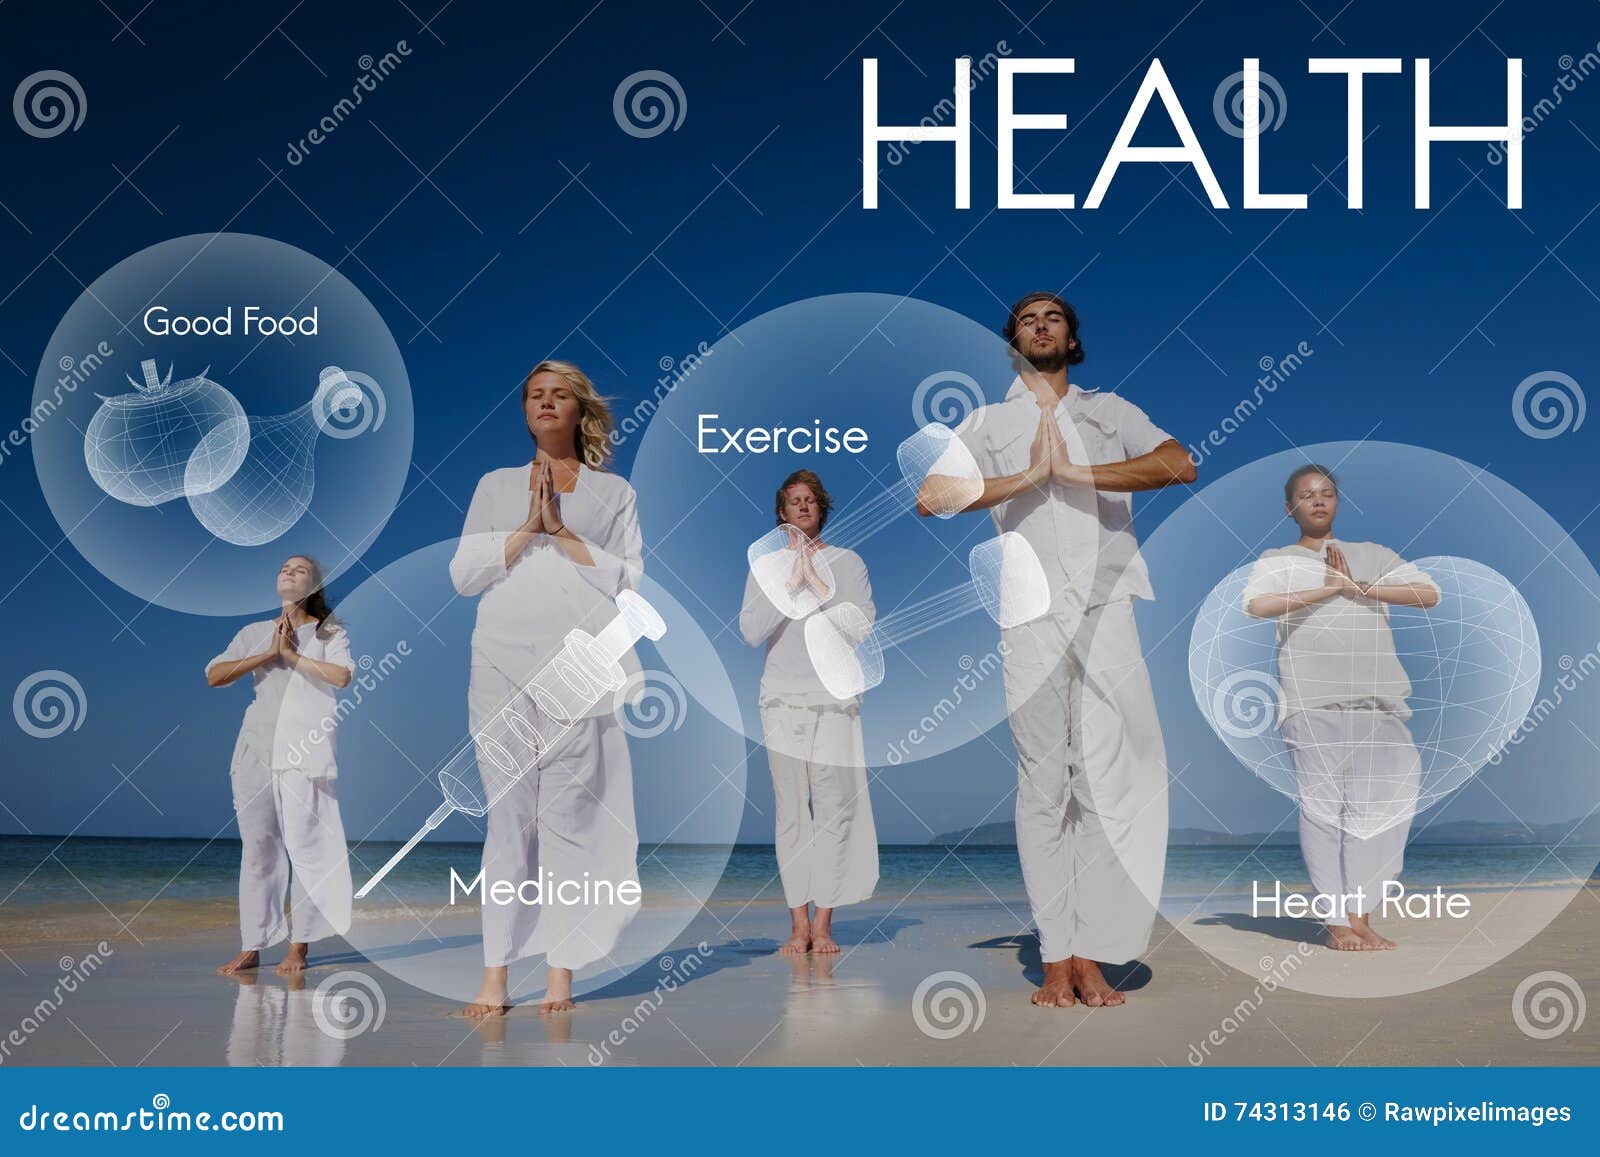 health wellbeing wellness vitality healthcare concept